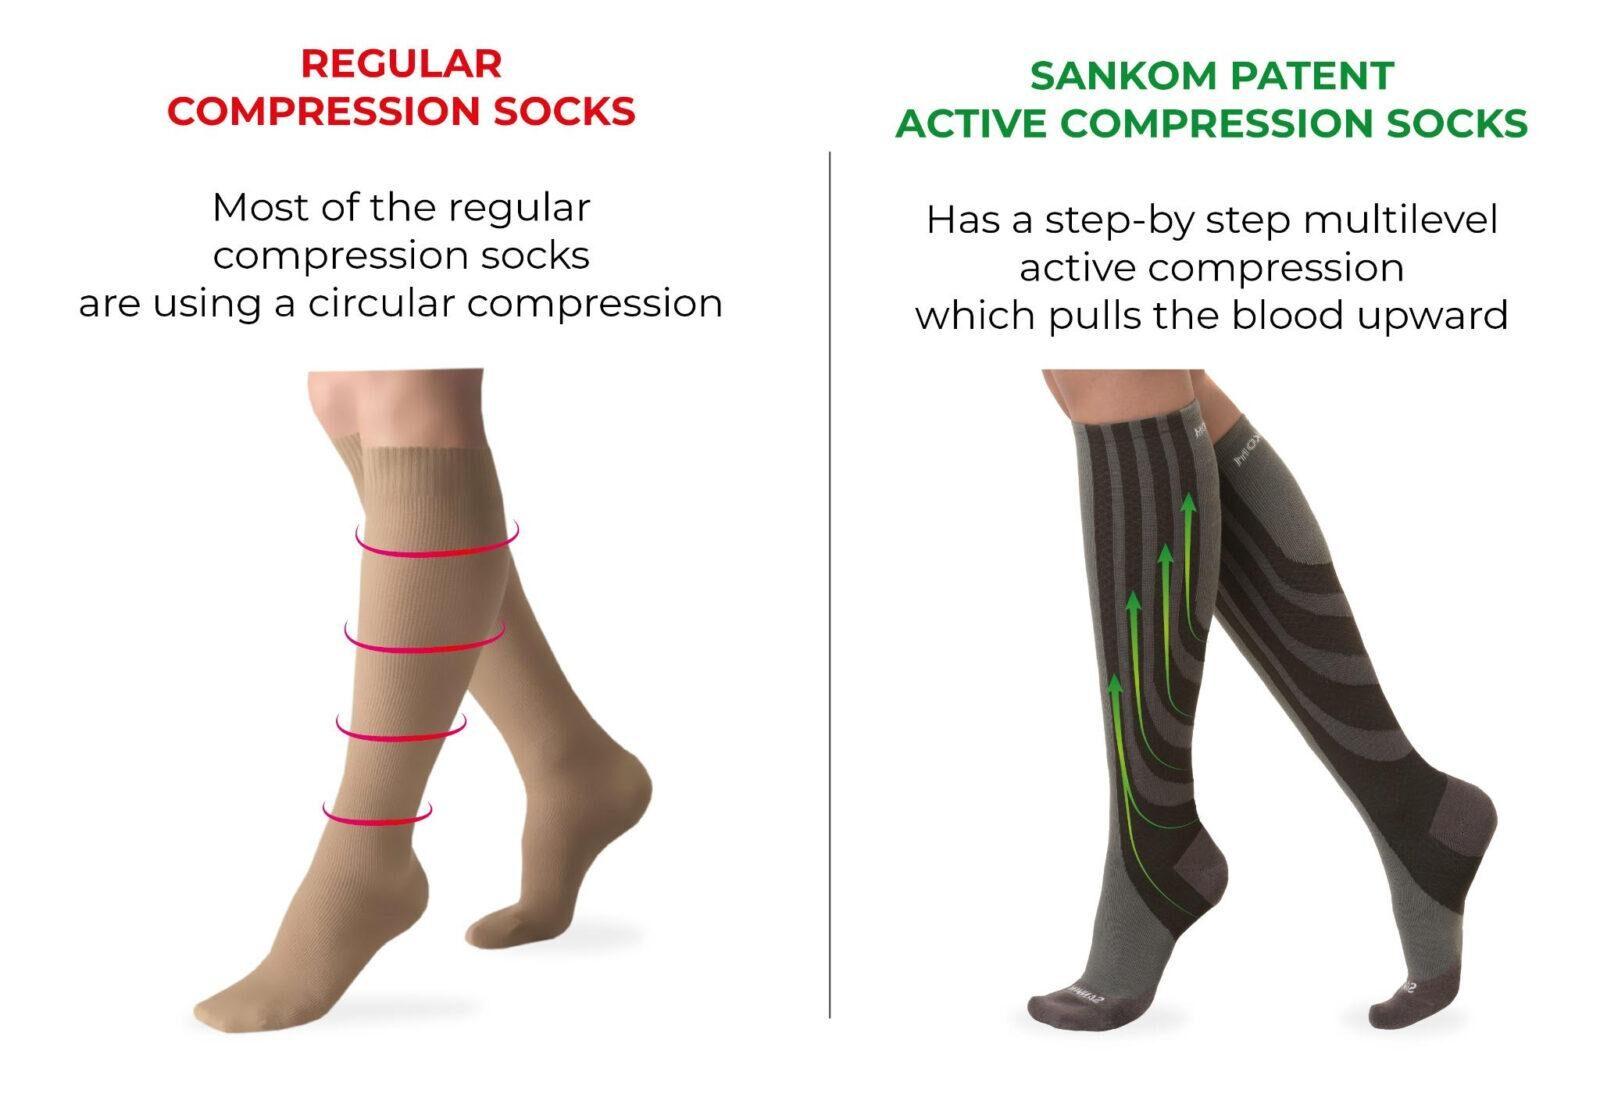 Buy Sankom Patent Socks Compression Gray in Qatar Orders delivered quickly  - Wellcare Pharmacy